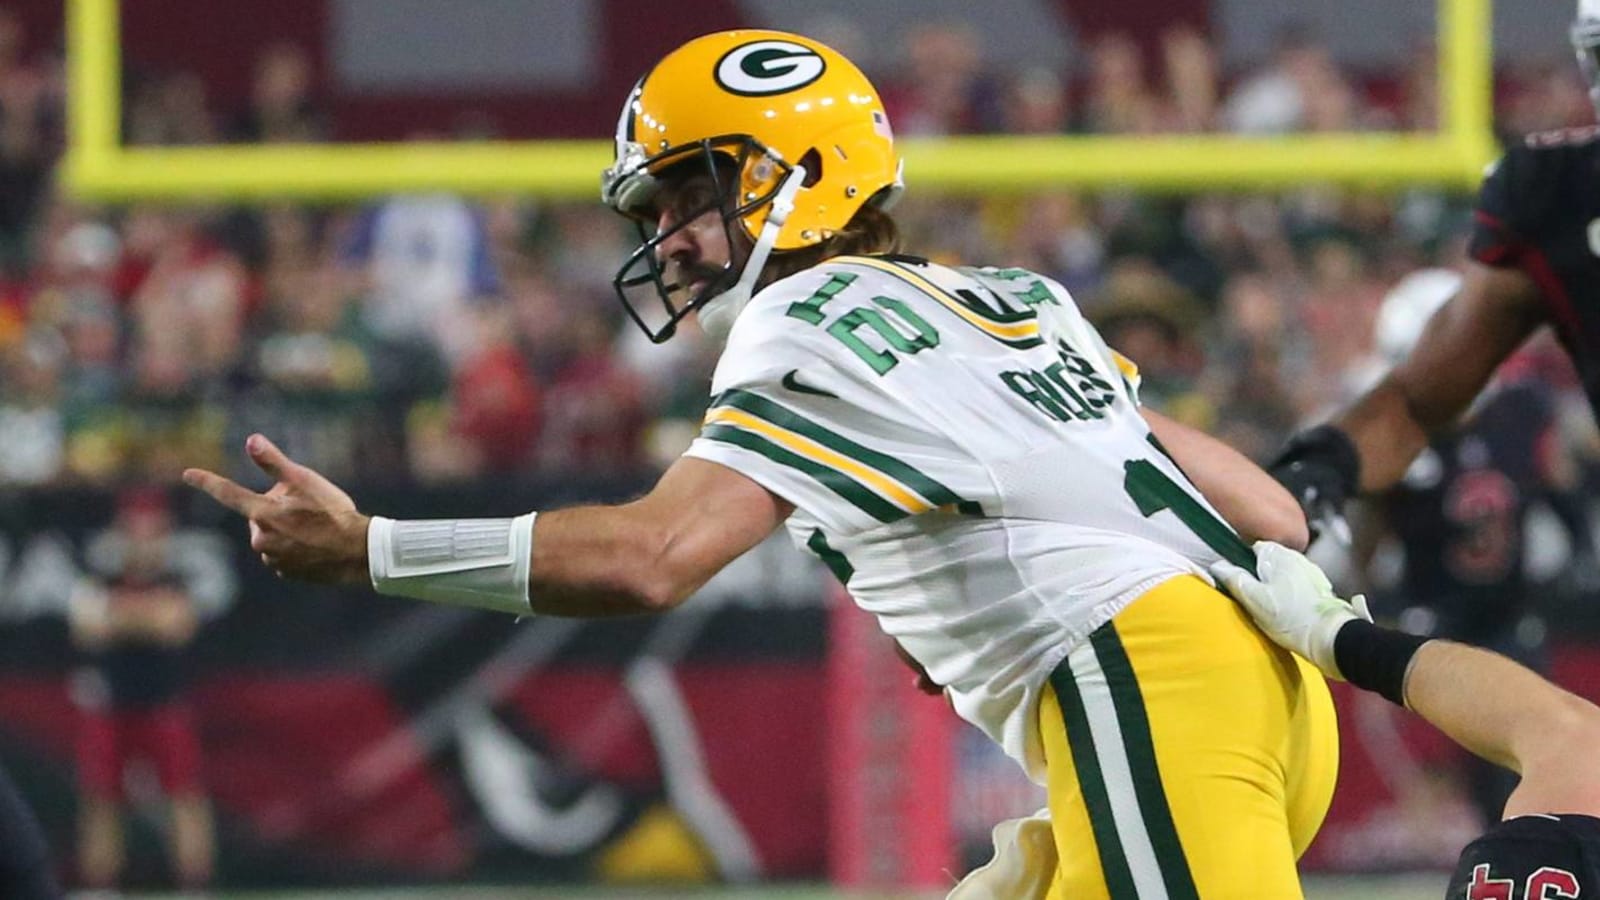 Aaron Rodgers begging for a call mid-play went viral